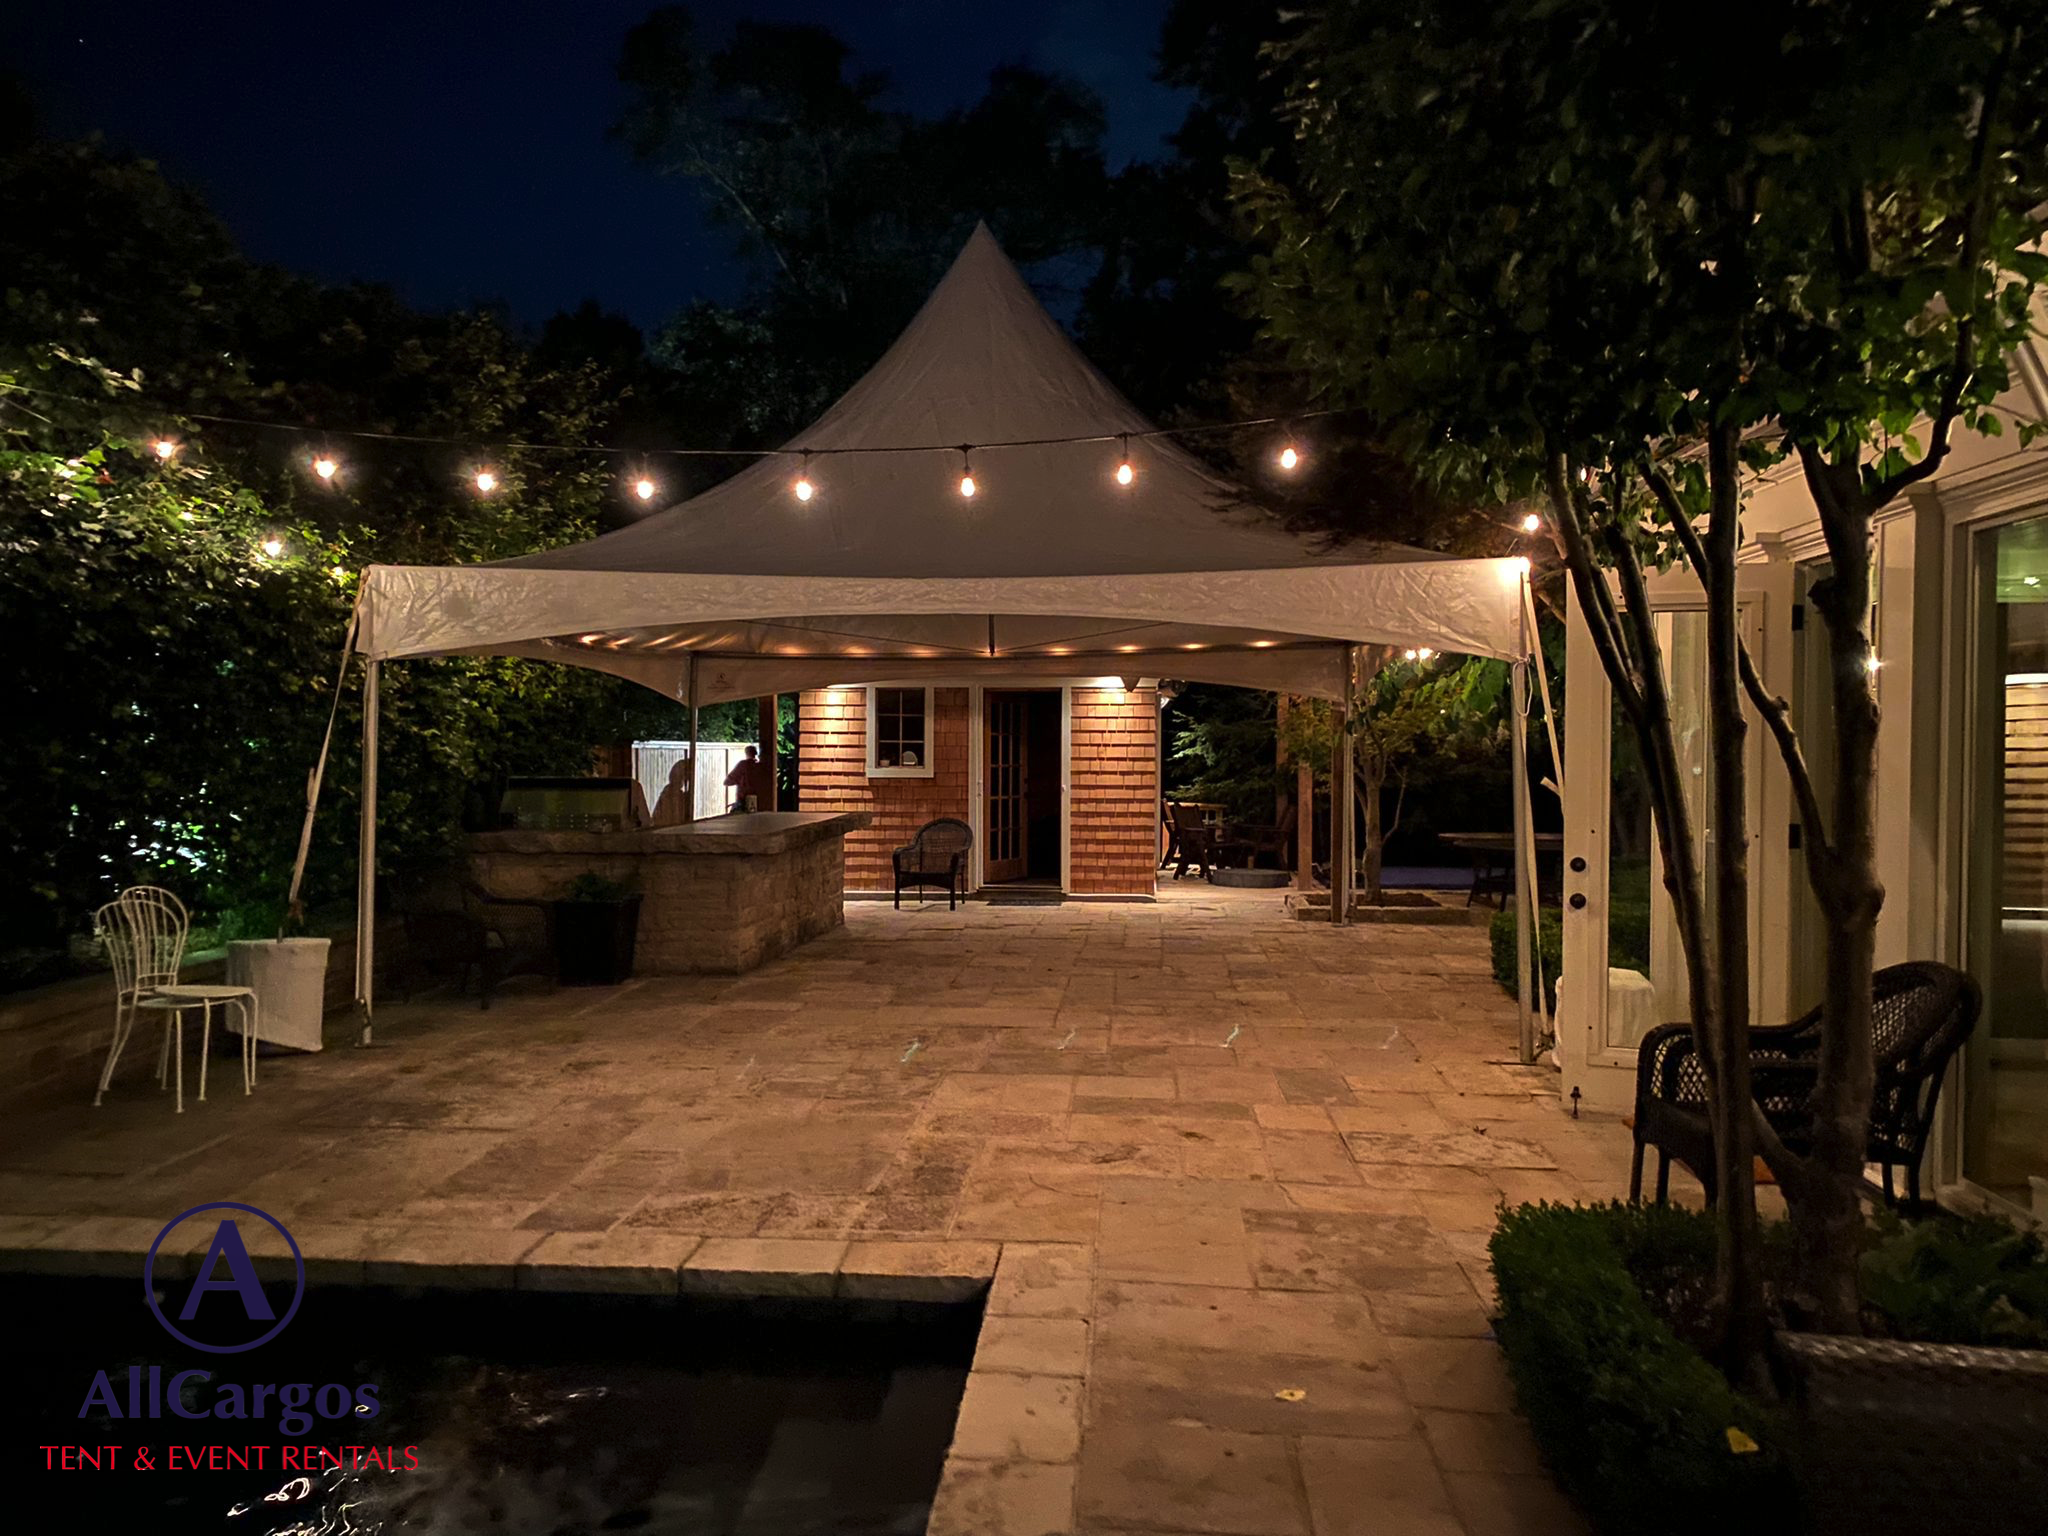 20x20 Frame Tent Rental for Backyard Intimate Event